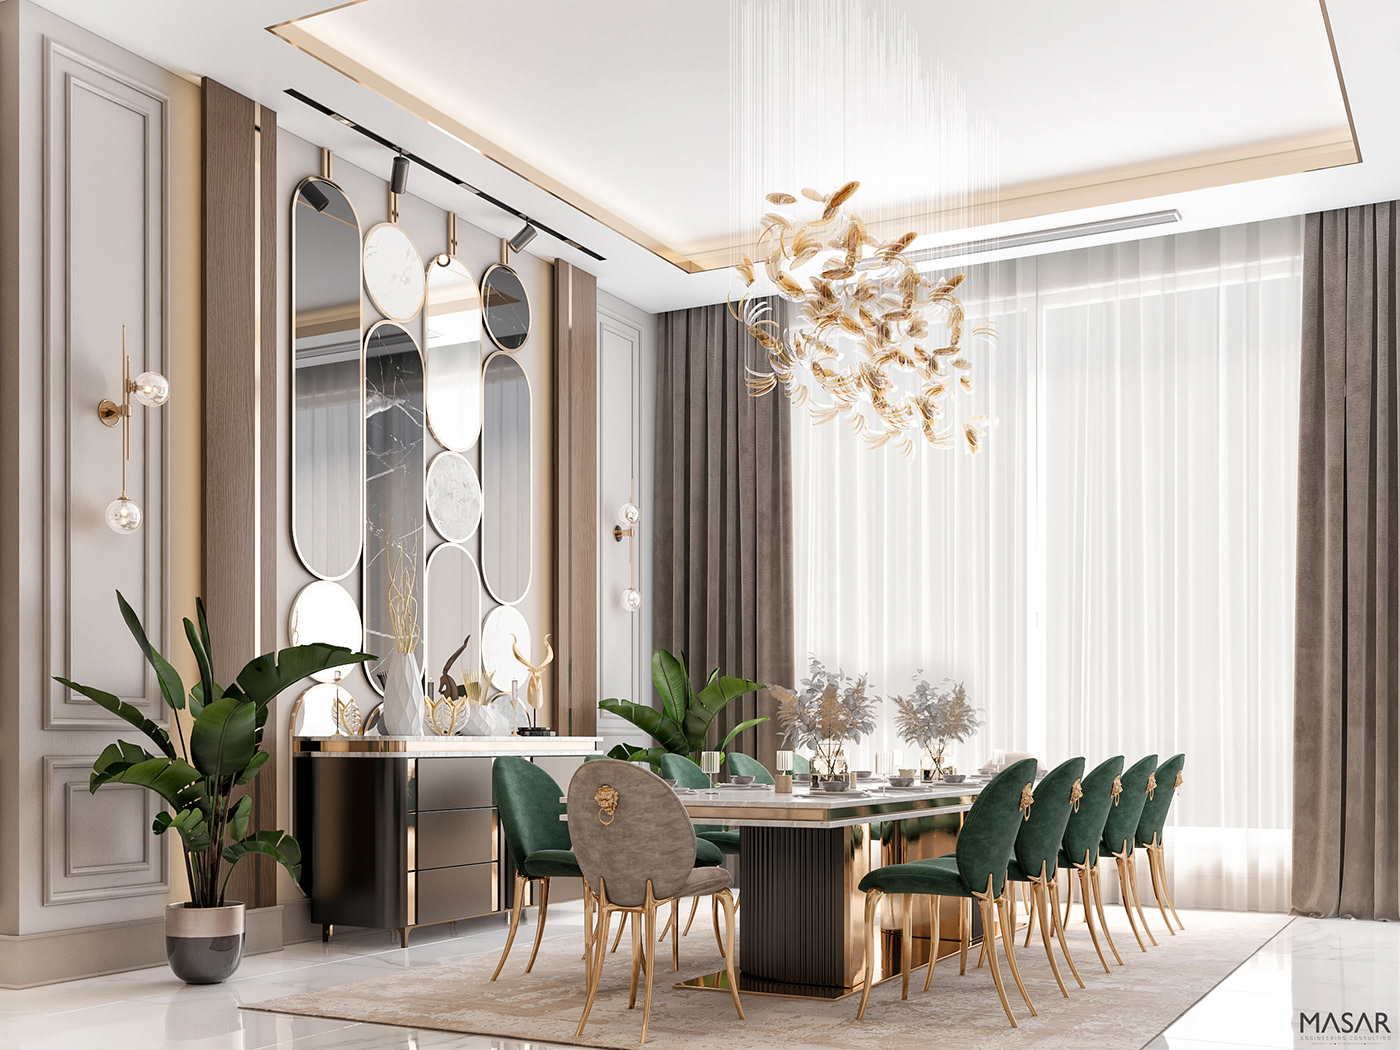 3D 3dsmax 3dviz architecture archviz beige console Covet design dining Entrance furniture green house Interior living luxurious luxury MAJLIS Marble mirror modelling Post Production reception Render rendering residential room toilet Villa visualization vray washers wc wood